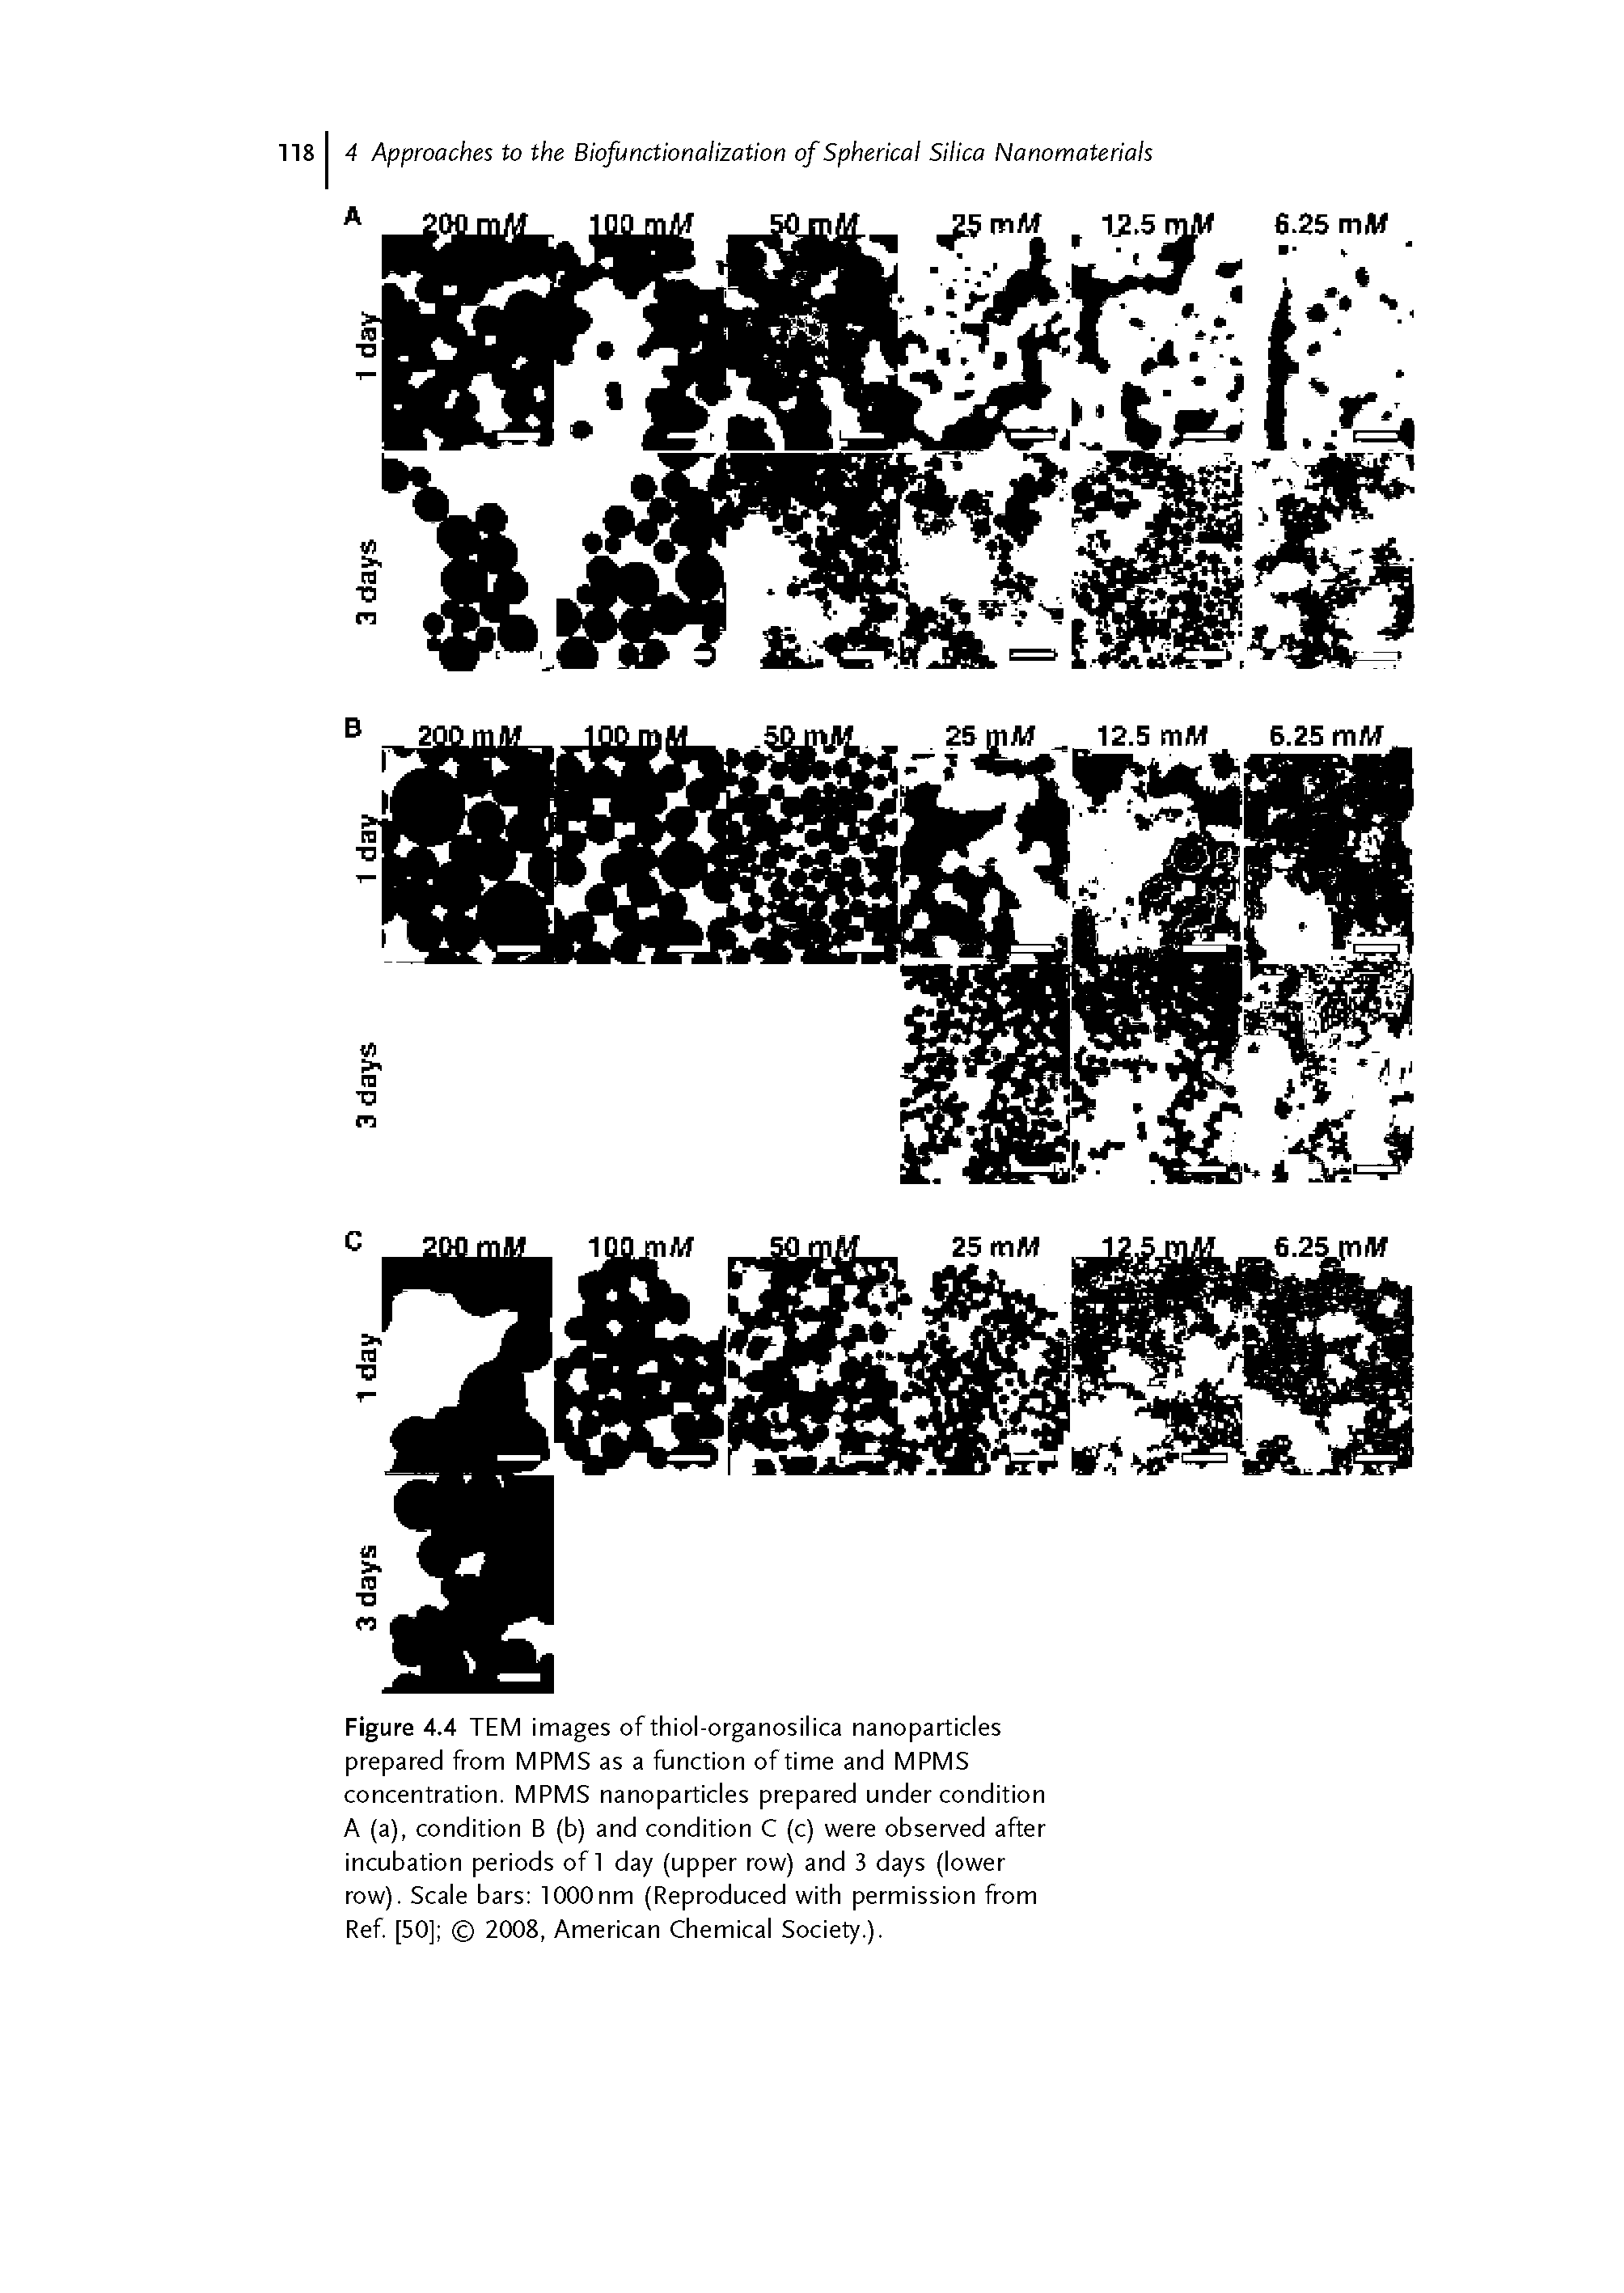 Figure 4.4 TEM images of thiol-organosilica nanoparticles prepared from MPMS as a function of time and MPMS concentration. MPMS nanoparticles prepared under condition A (a), condition B (b) and condition C (c) were observed after incubation periods of 1 day (upper row) and 3 days (lower row). Scale bars lOOOnm (Reproduced with permission from Ref [50] 2008, American Chemical Society.).